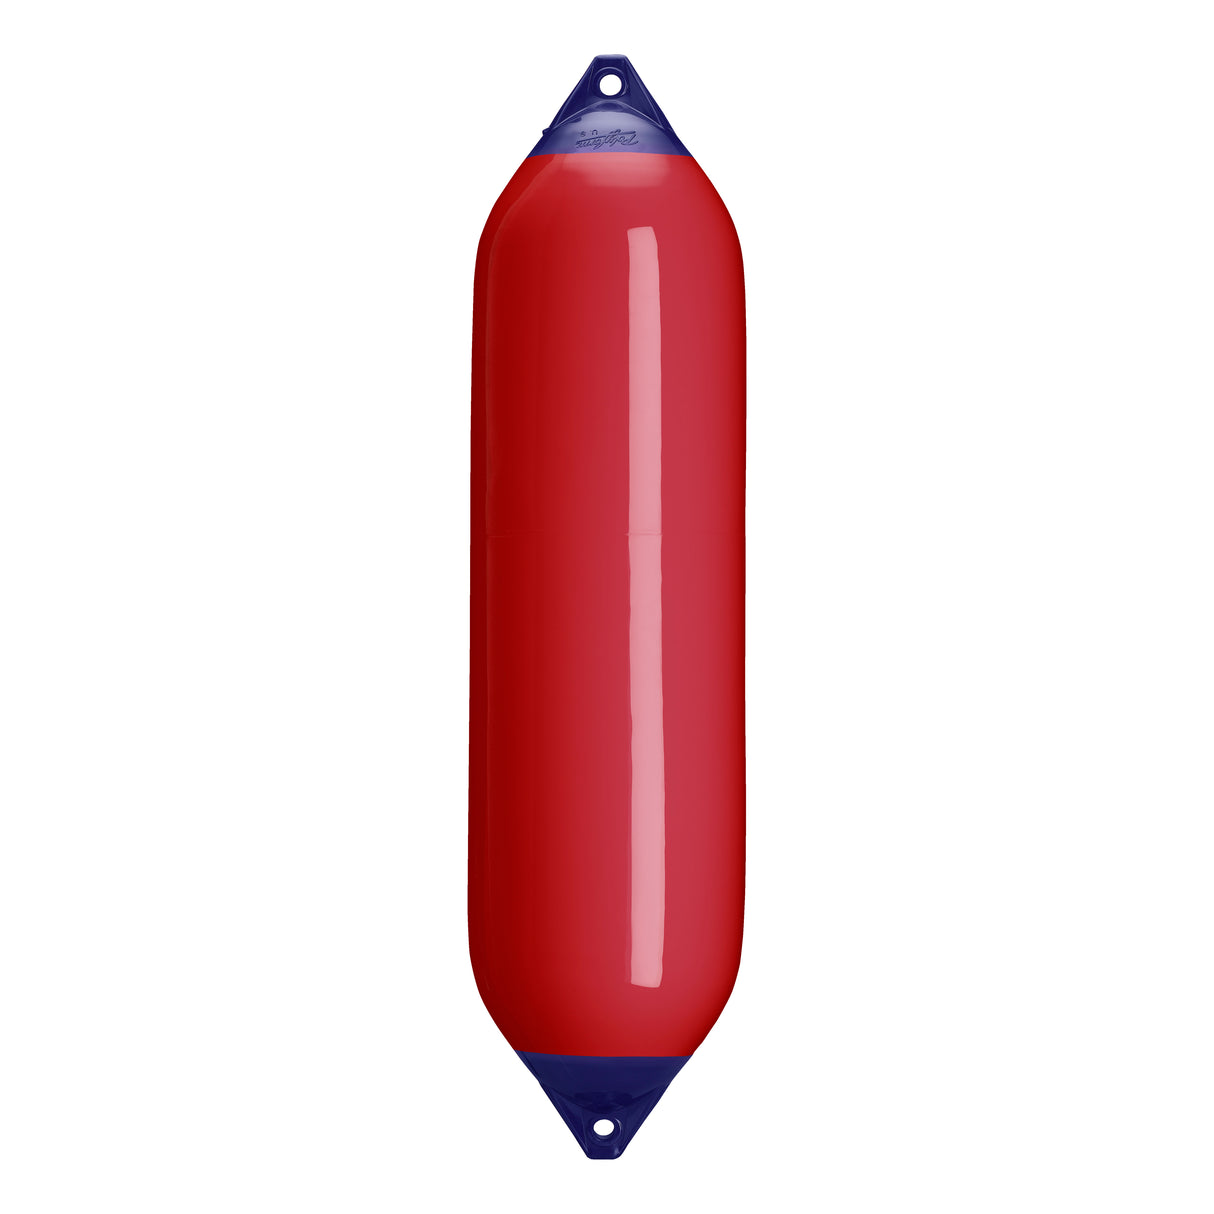 Classic Red boat fender with Navy-Top, Polyform F-8 